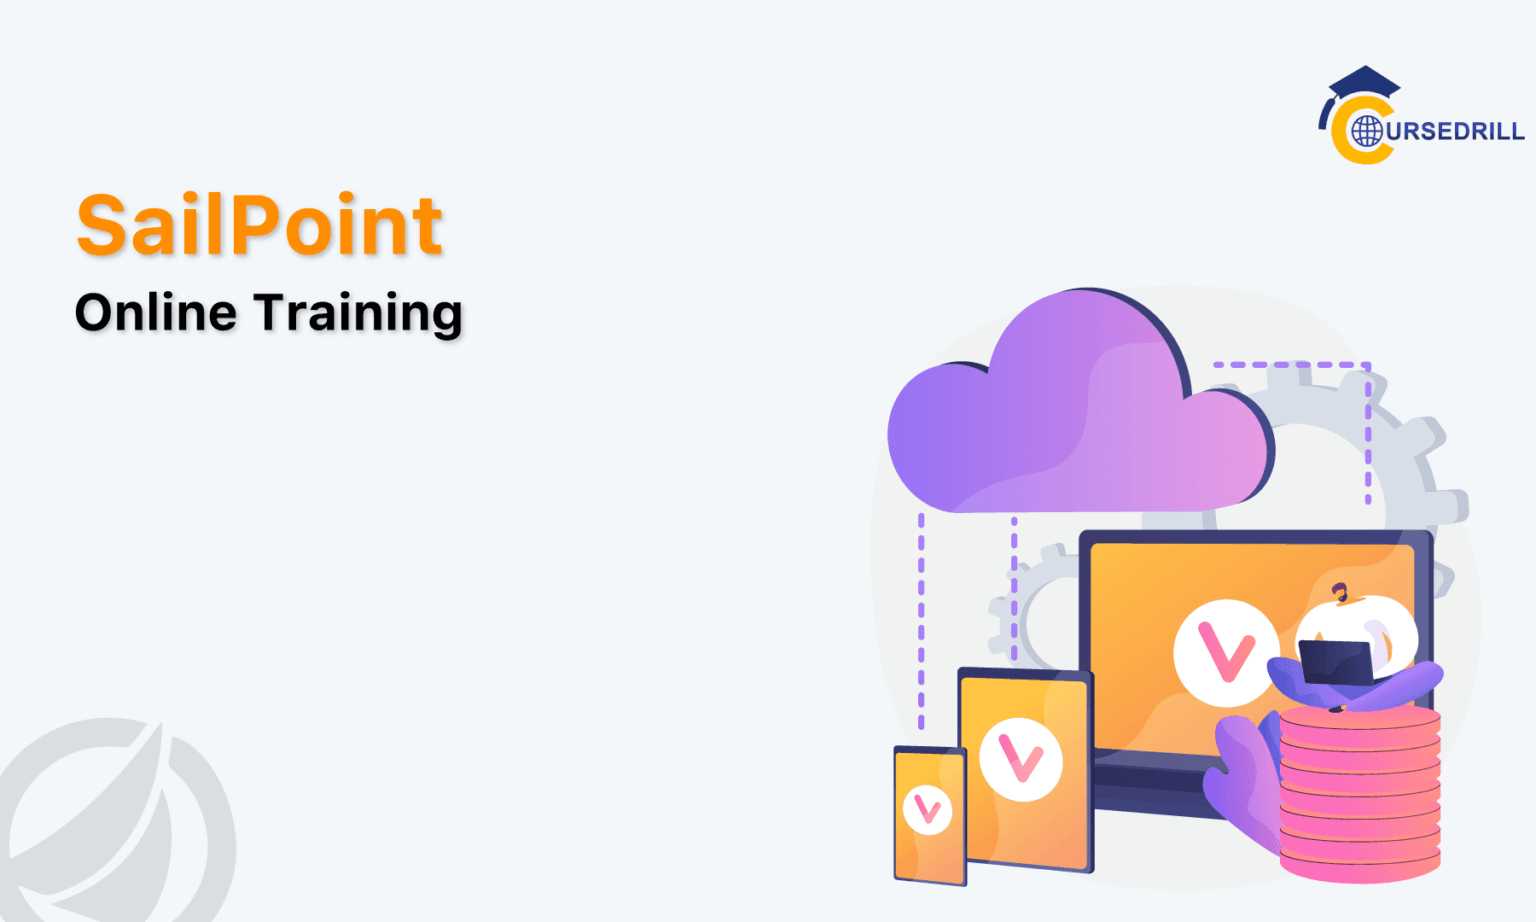 Get job ready with SailPoint Training at CourseDrill